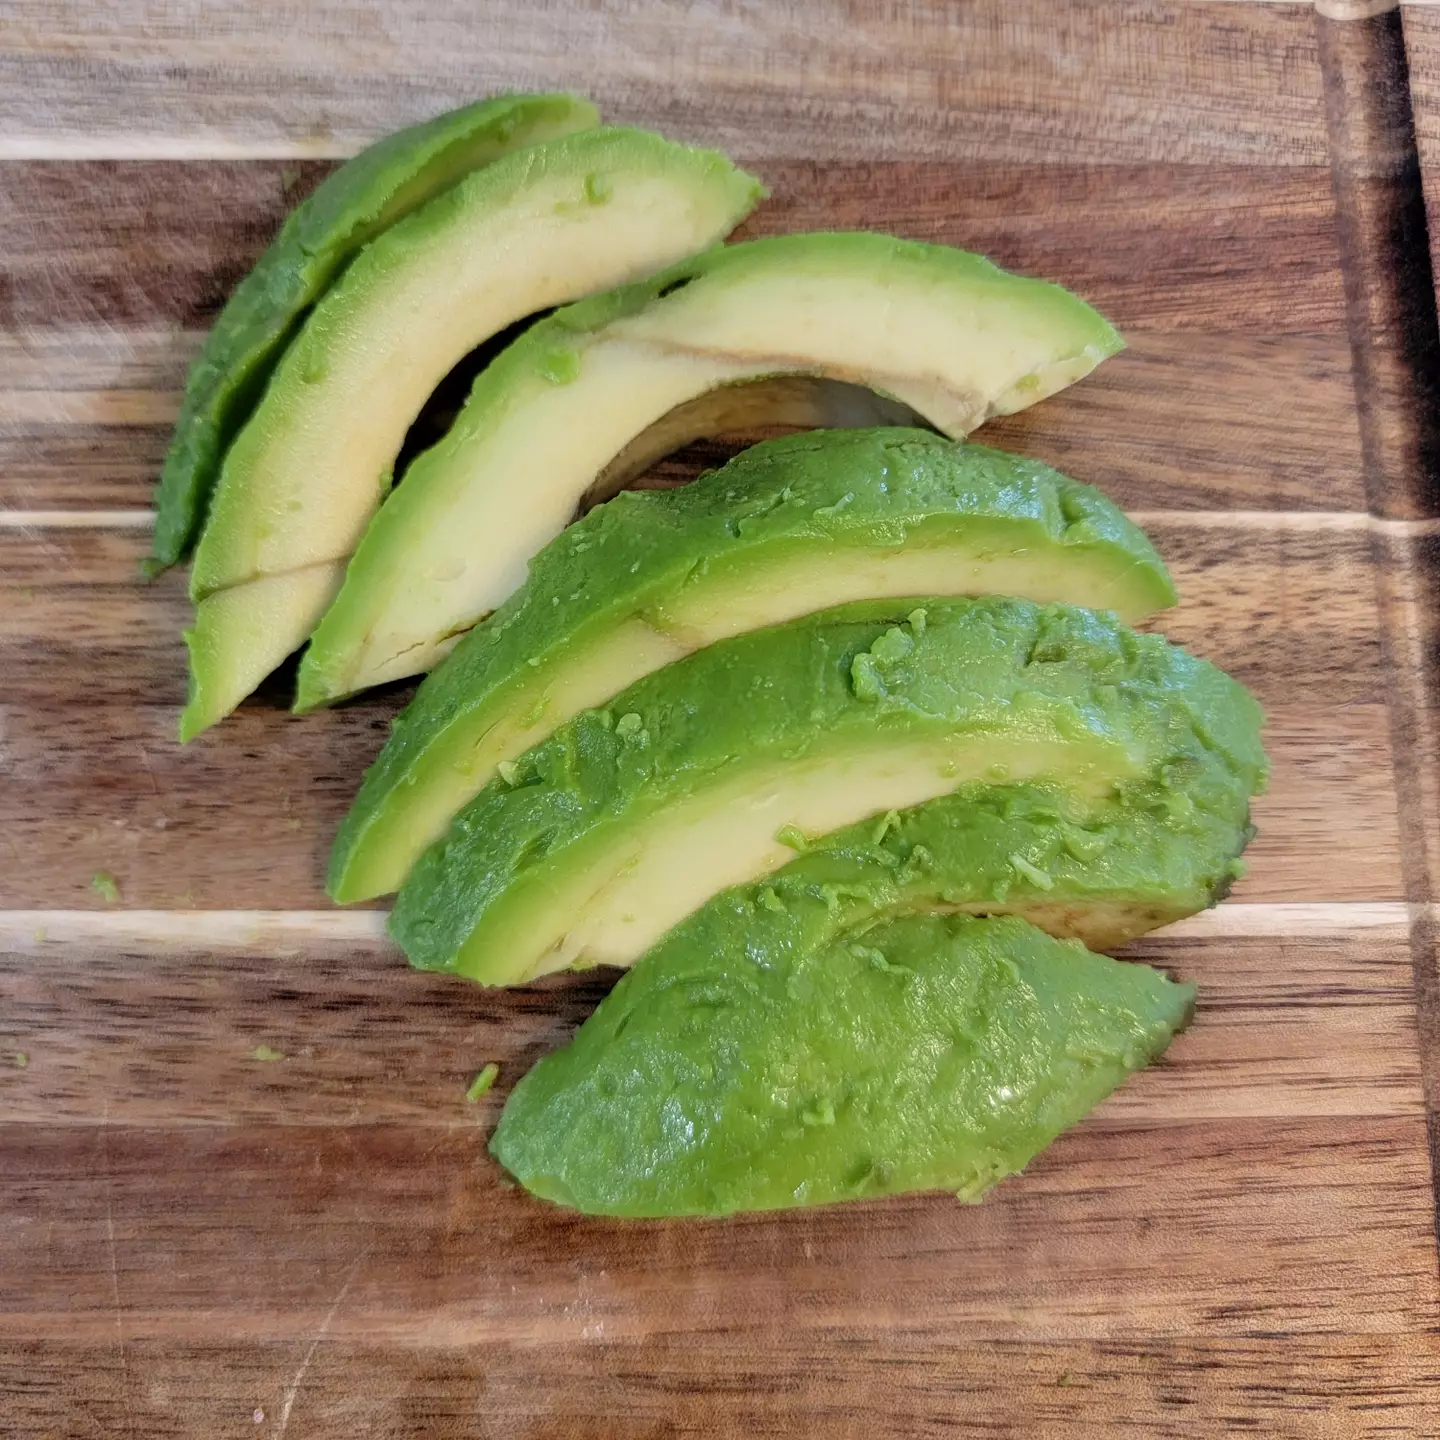 This trick is supposed to keep your avocados fresh all month long. [